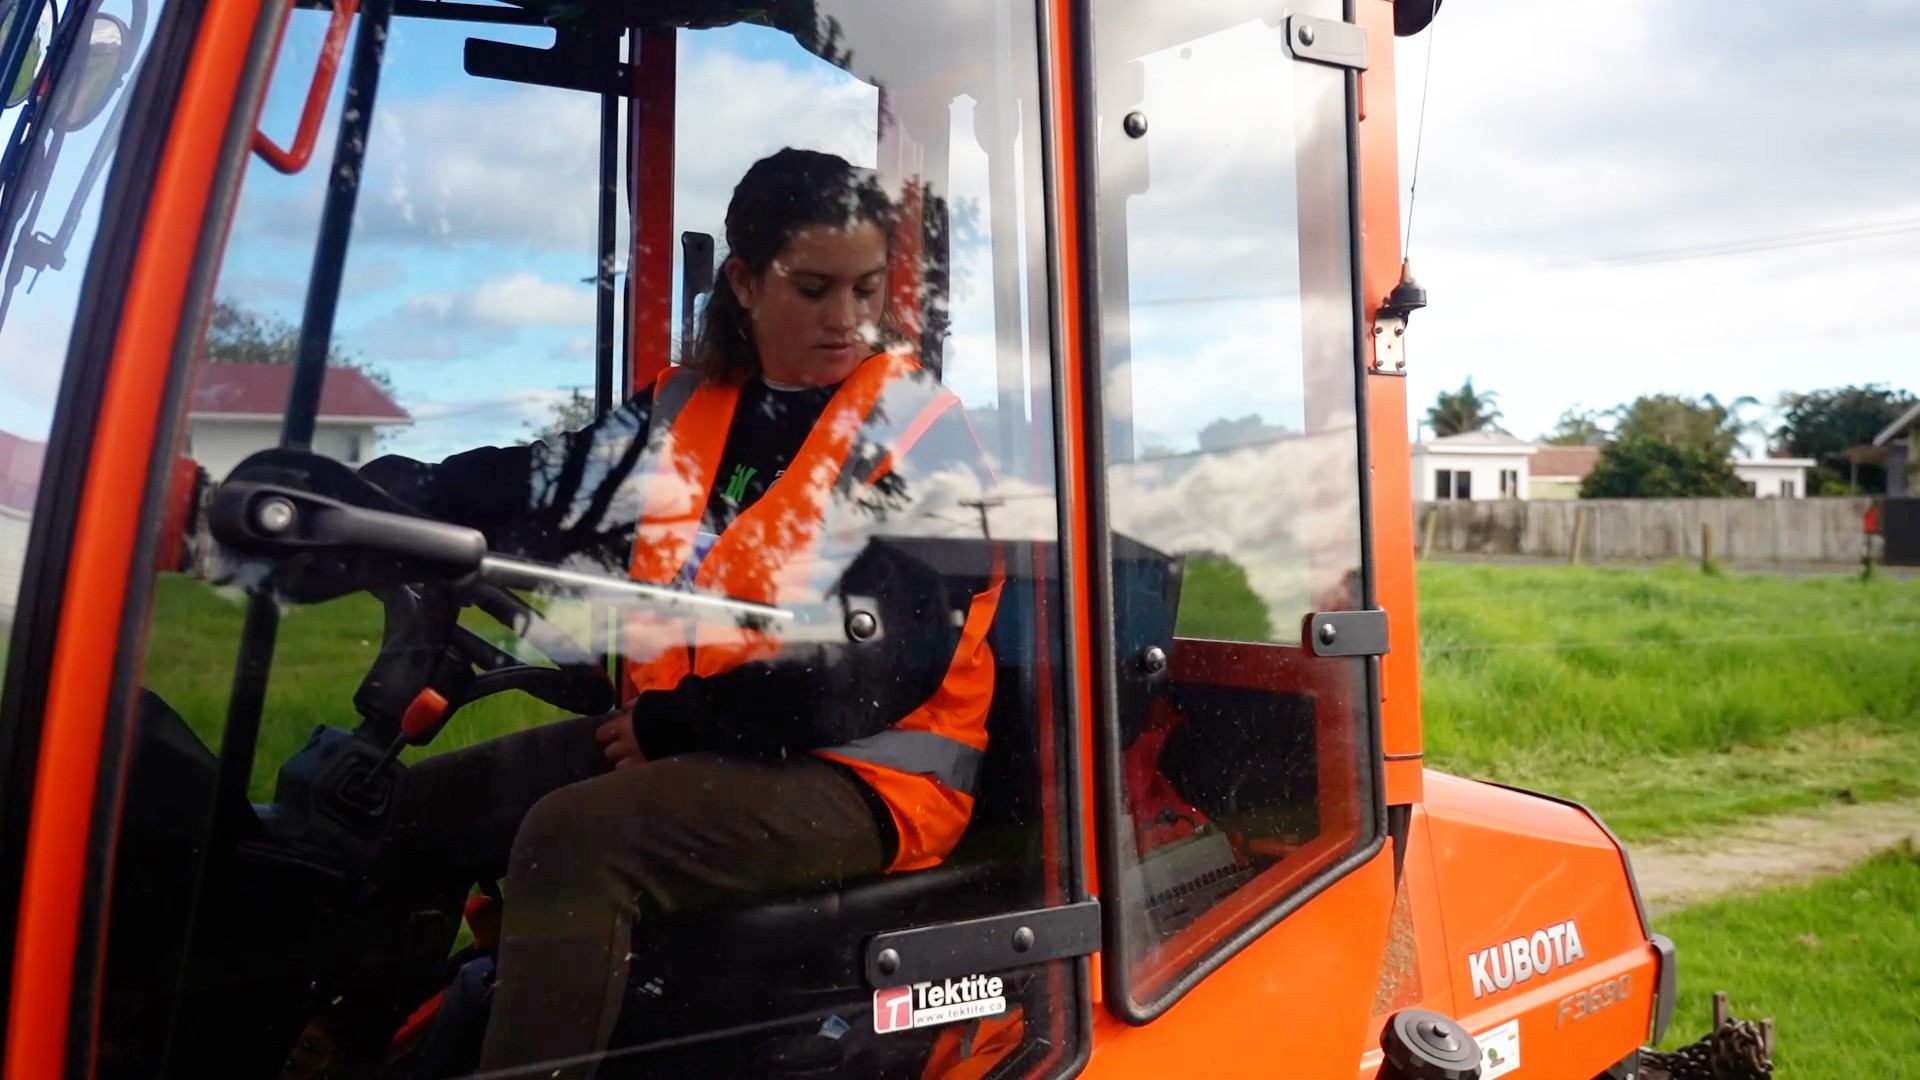 Parks and Reserves Cadet, Rhiannon, driving the mower